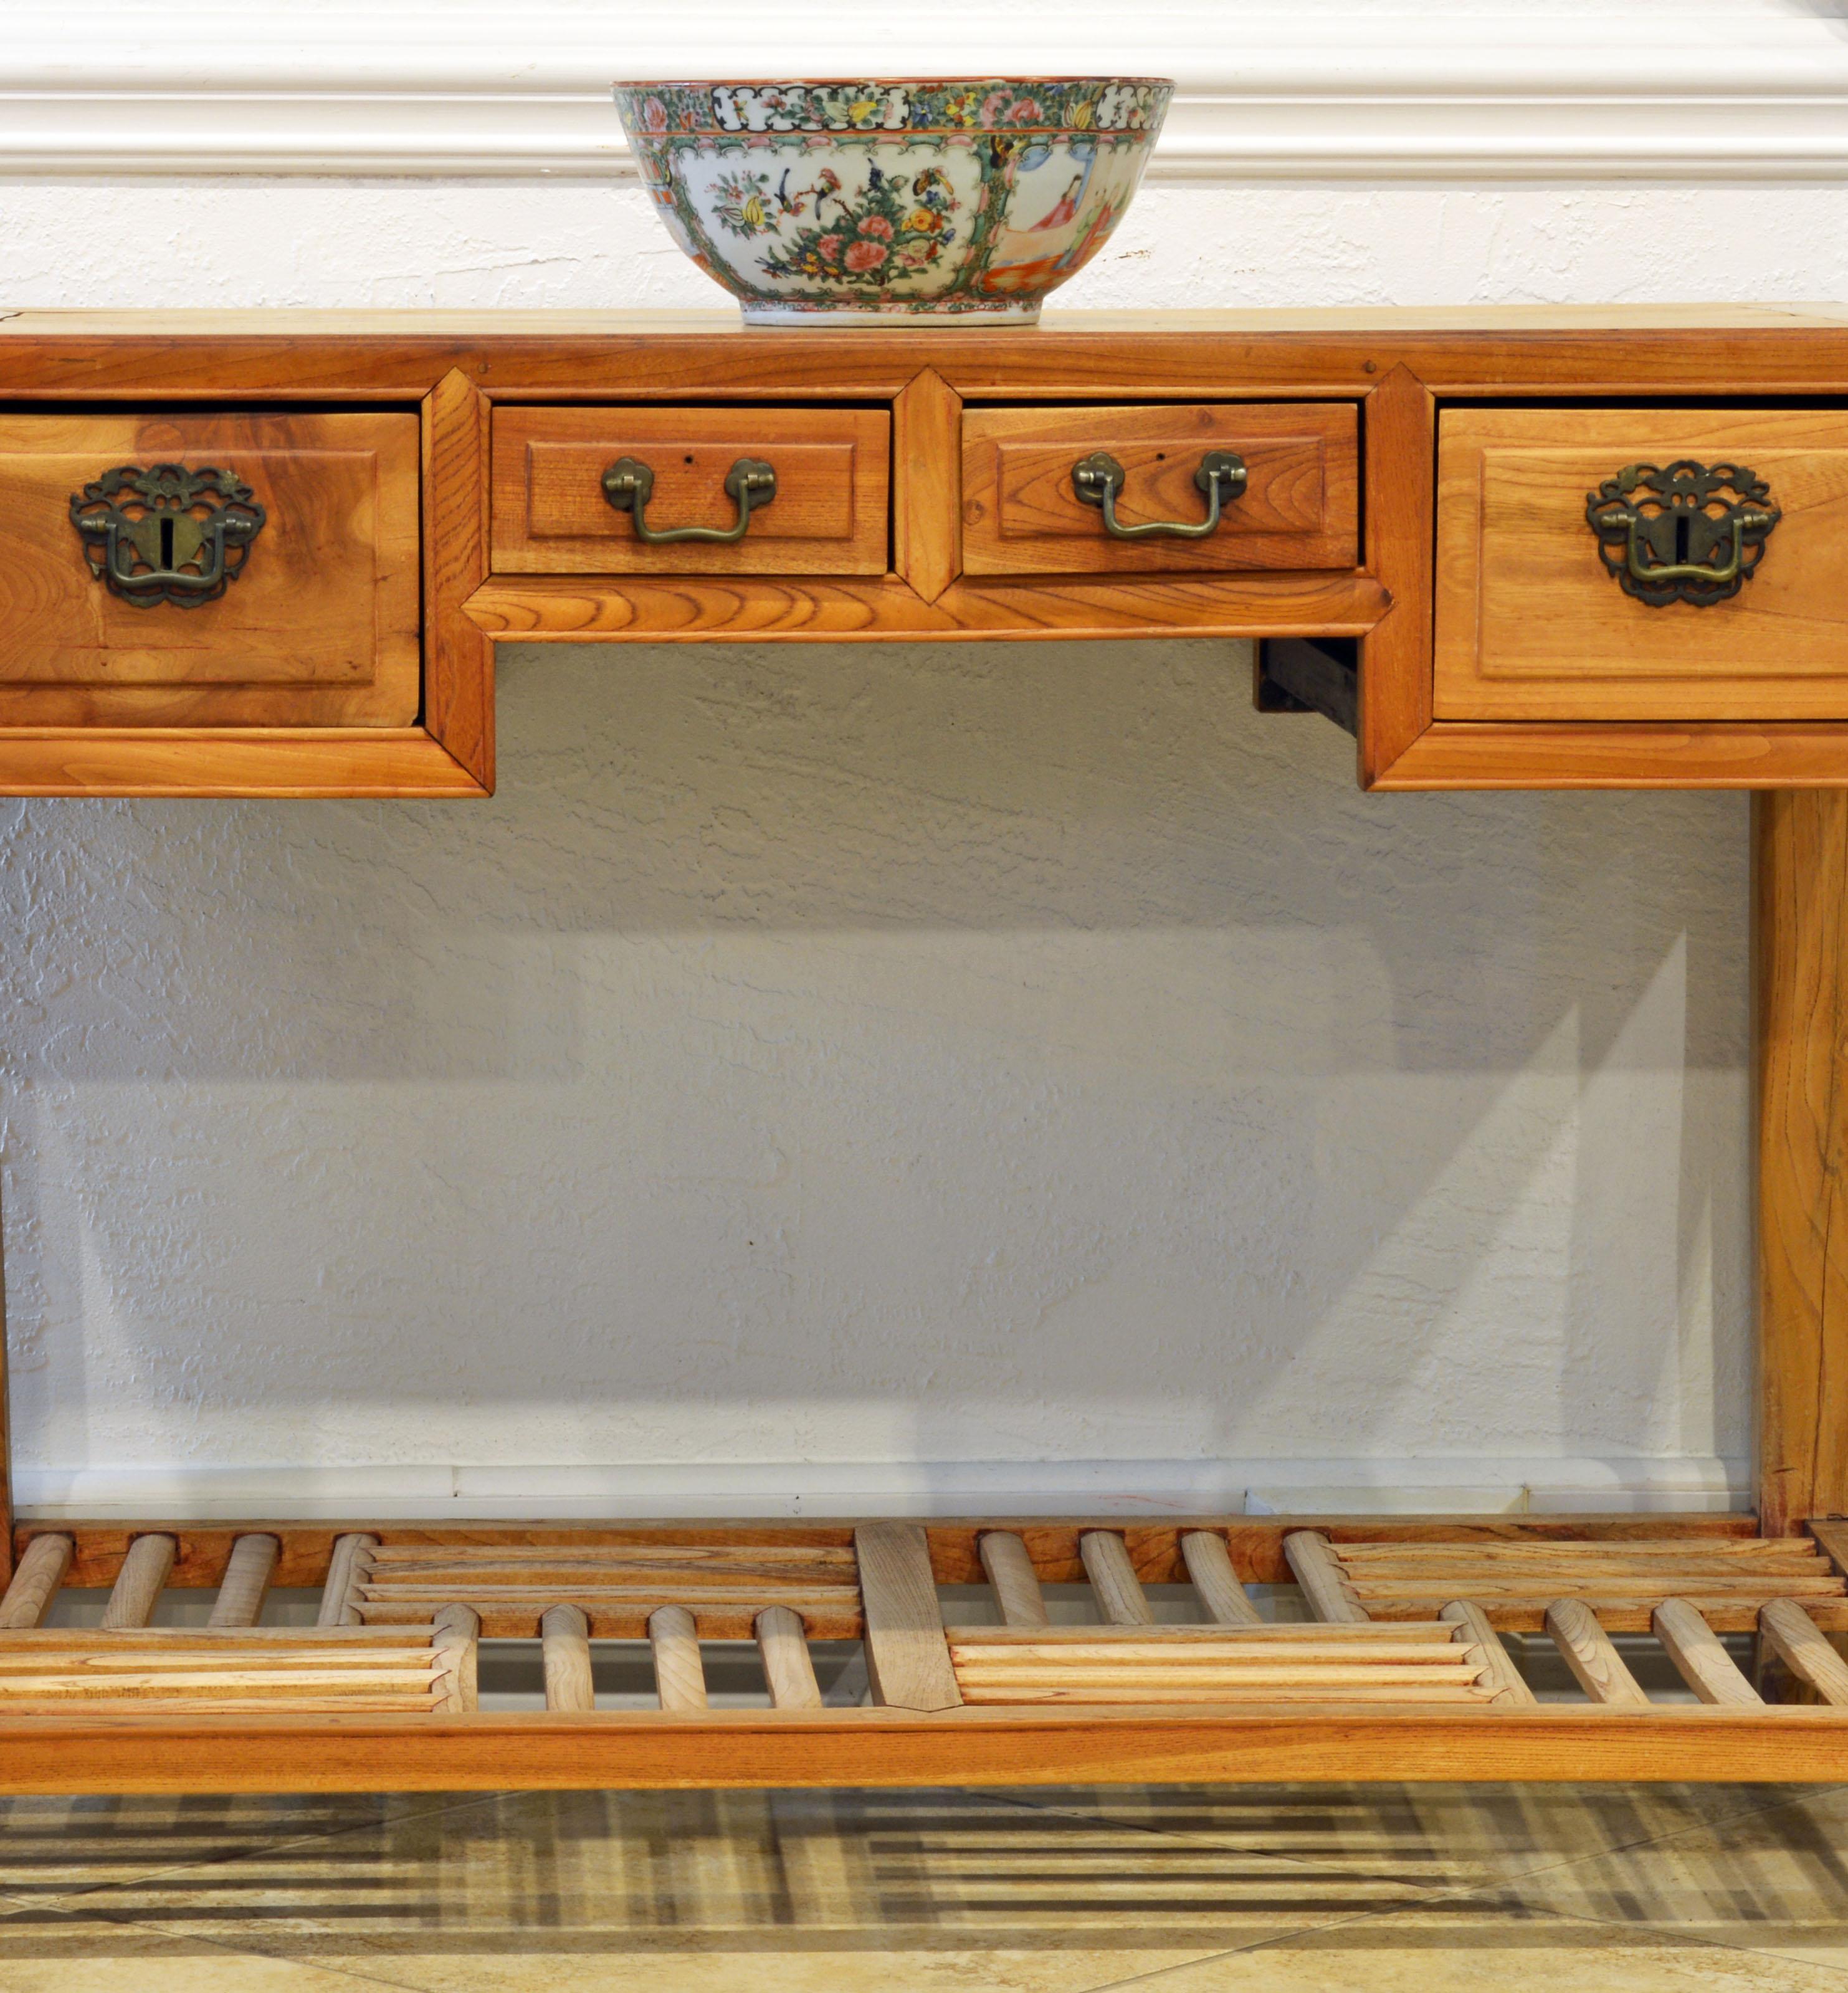 This late 19th century Chinese natural color elm wood desk features two center small drawers flanked by two deeper drawers. The legs are joined by a low lattice shelf in a traditional Chinese pattern.